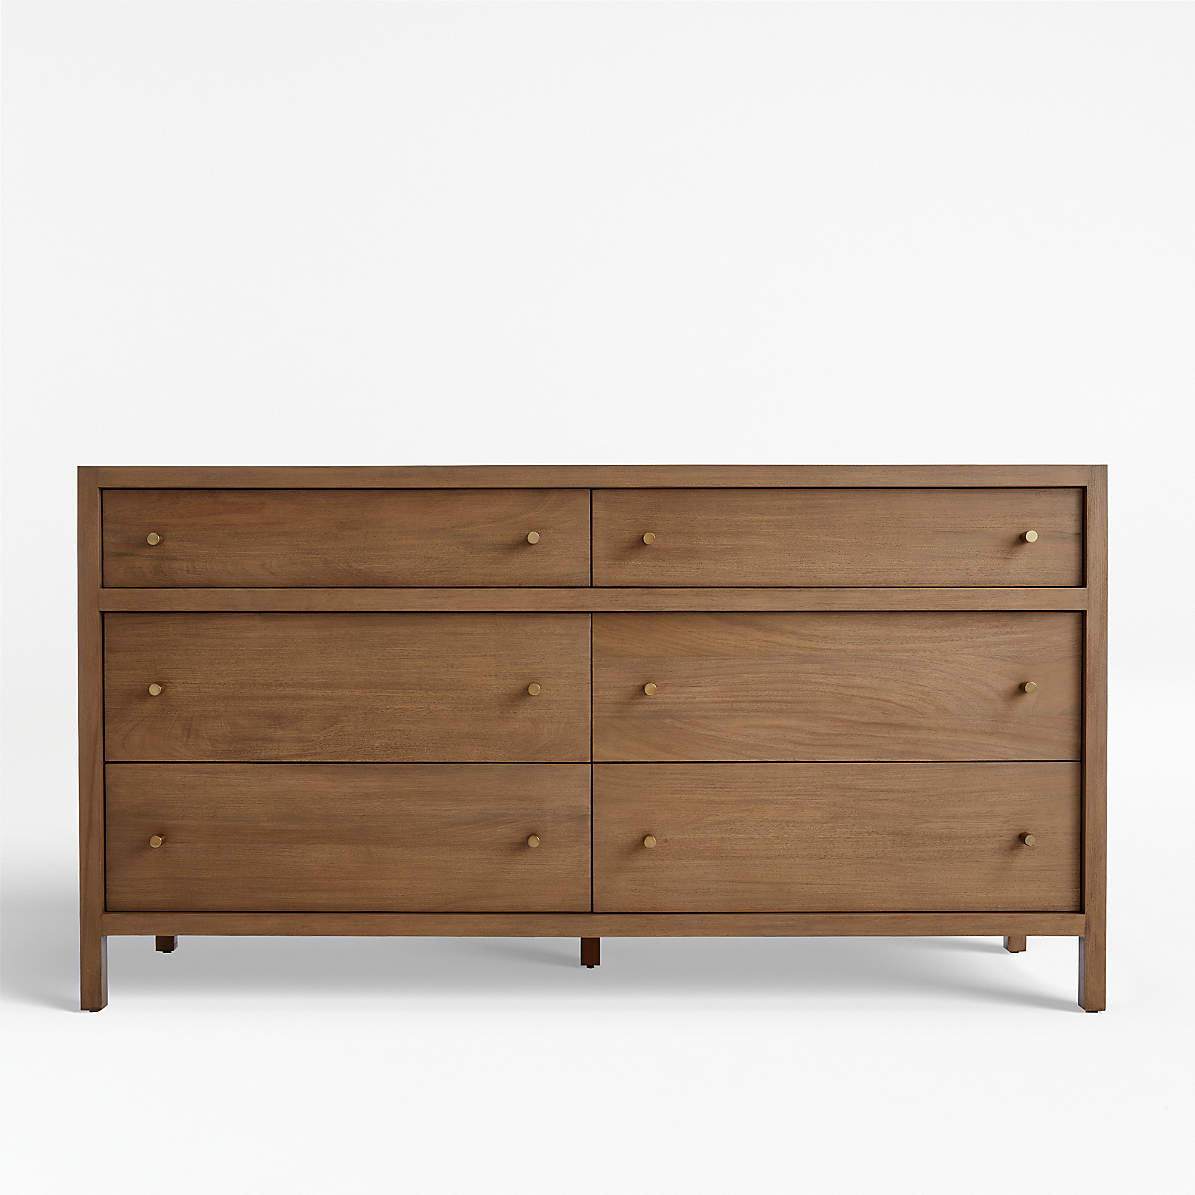 Keane Driftwood 6 Drawer Solid Wood Dresser Reviews Crate And Barrel